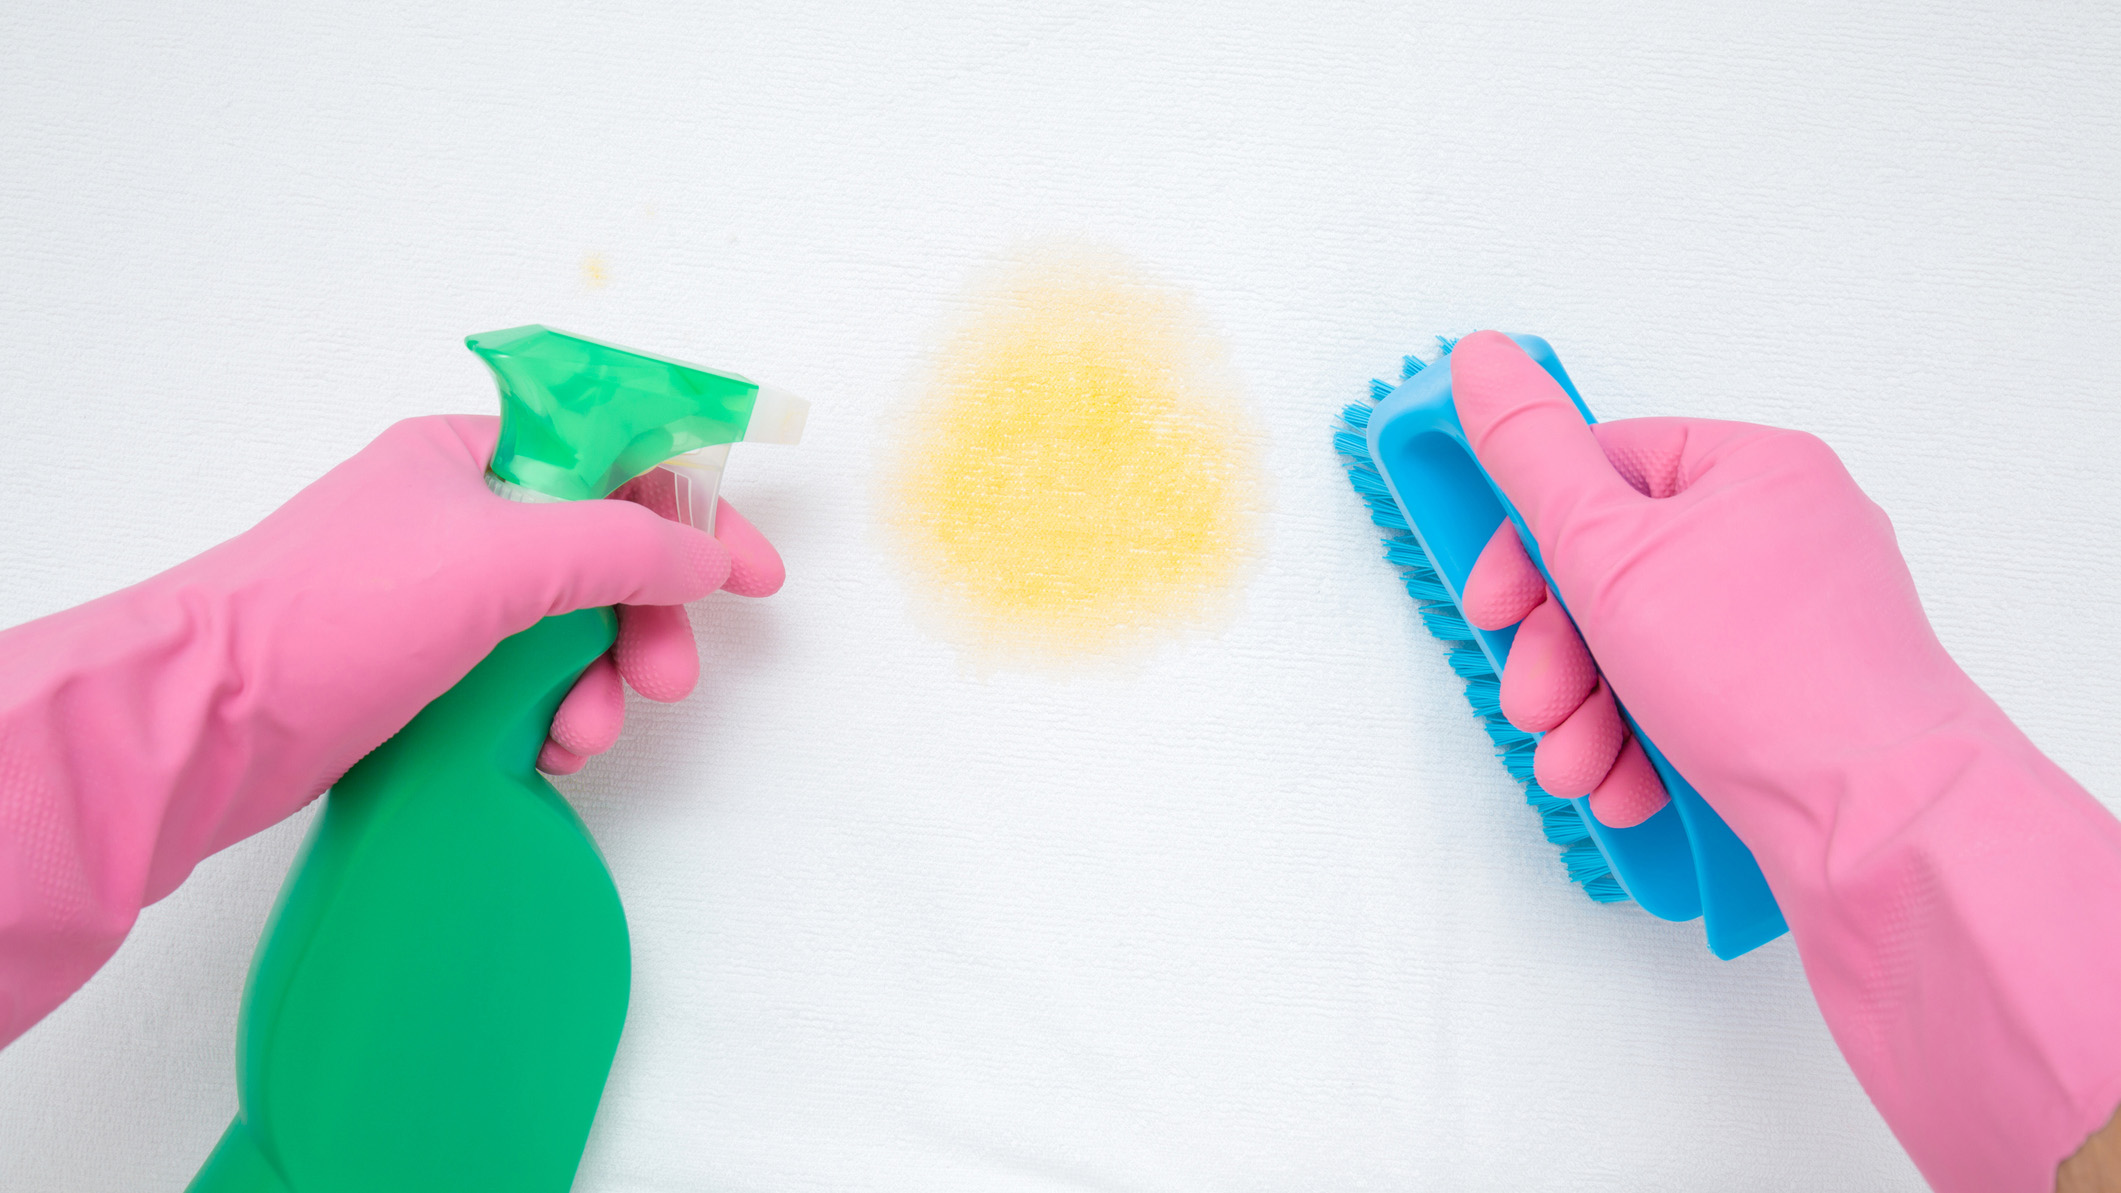 A person wearing pink rubber gloves attempts to get a yellow urine stain out of a white mattress